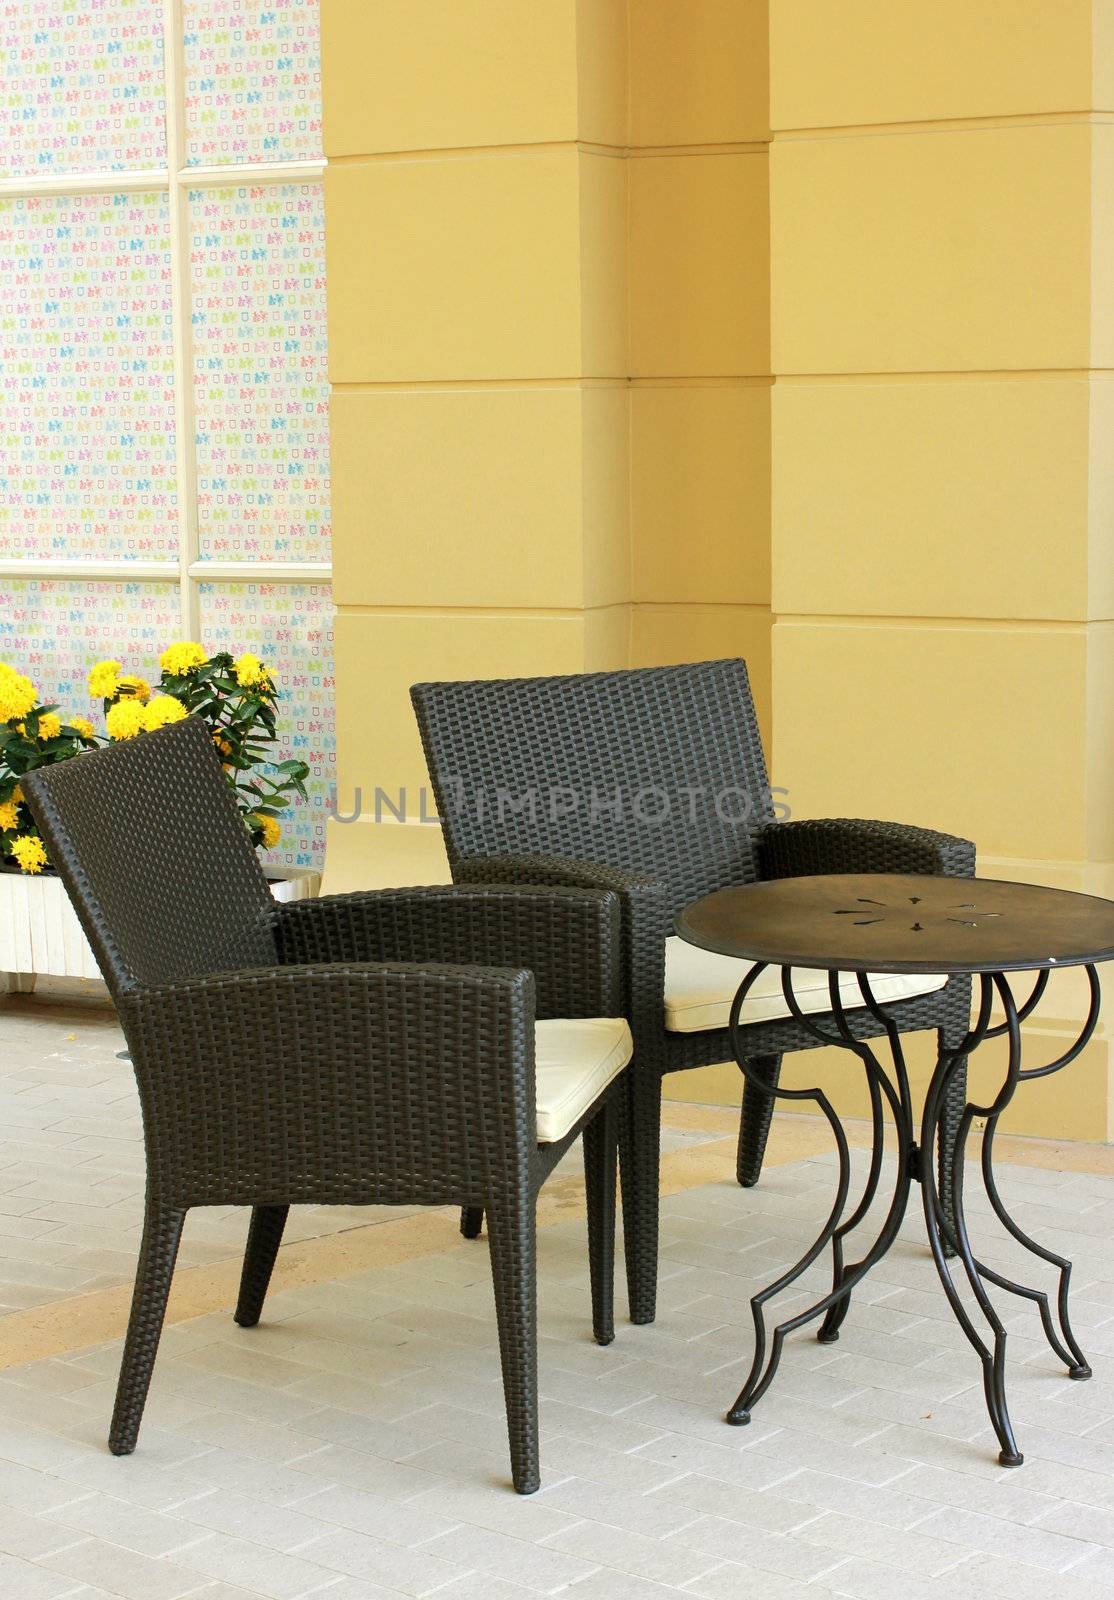 Black table and chair setting with flower in outdoor restaurant by nuchylee